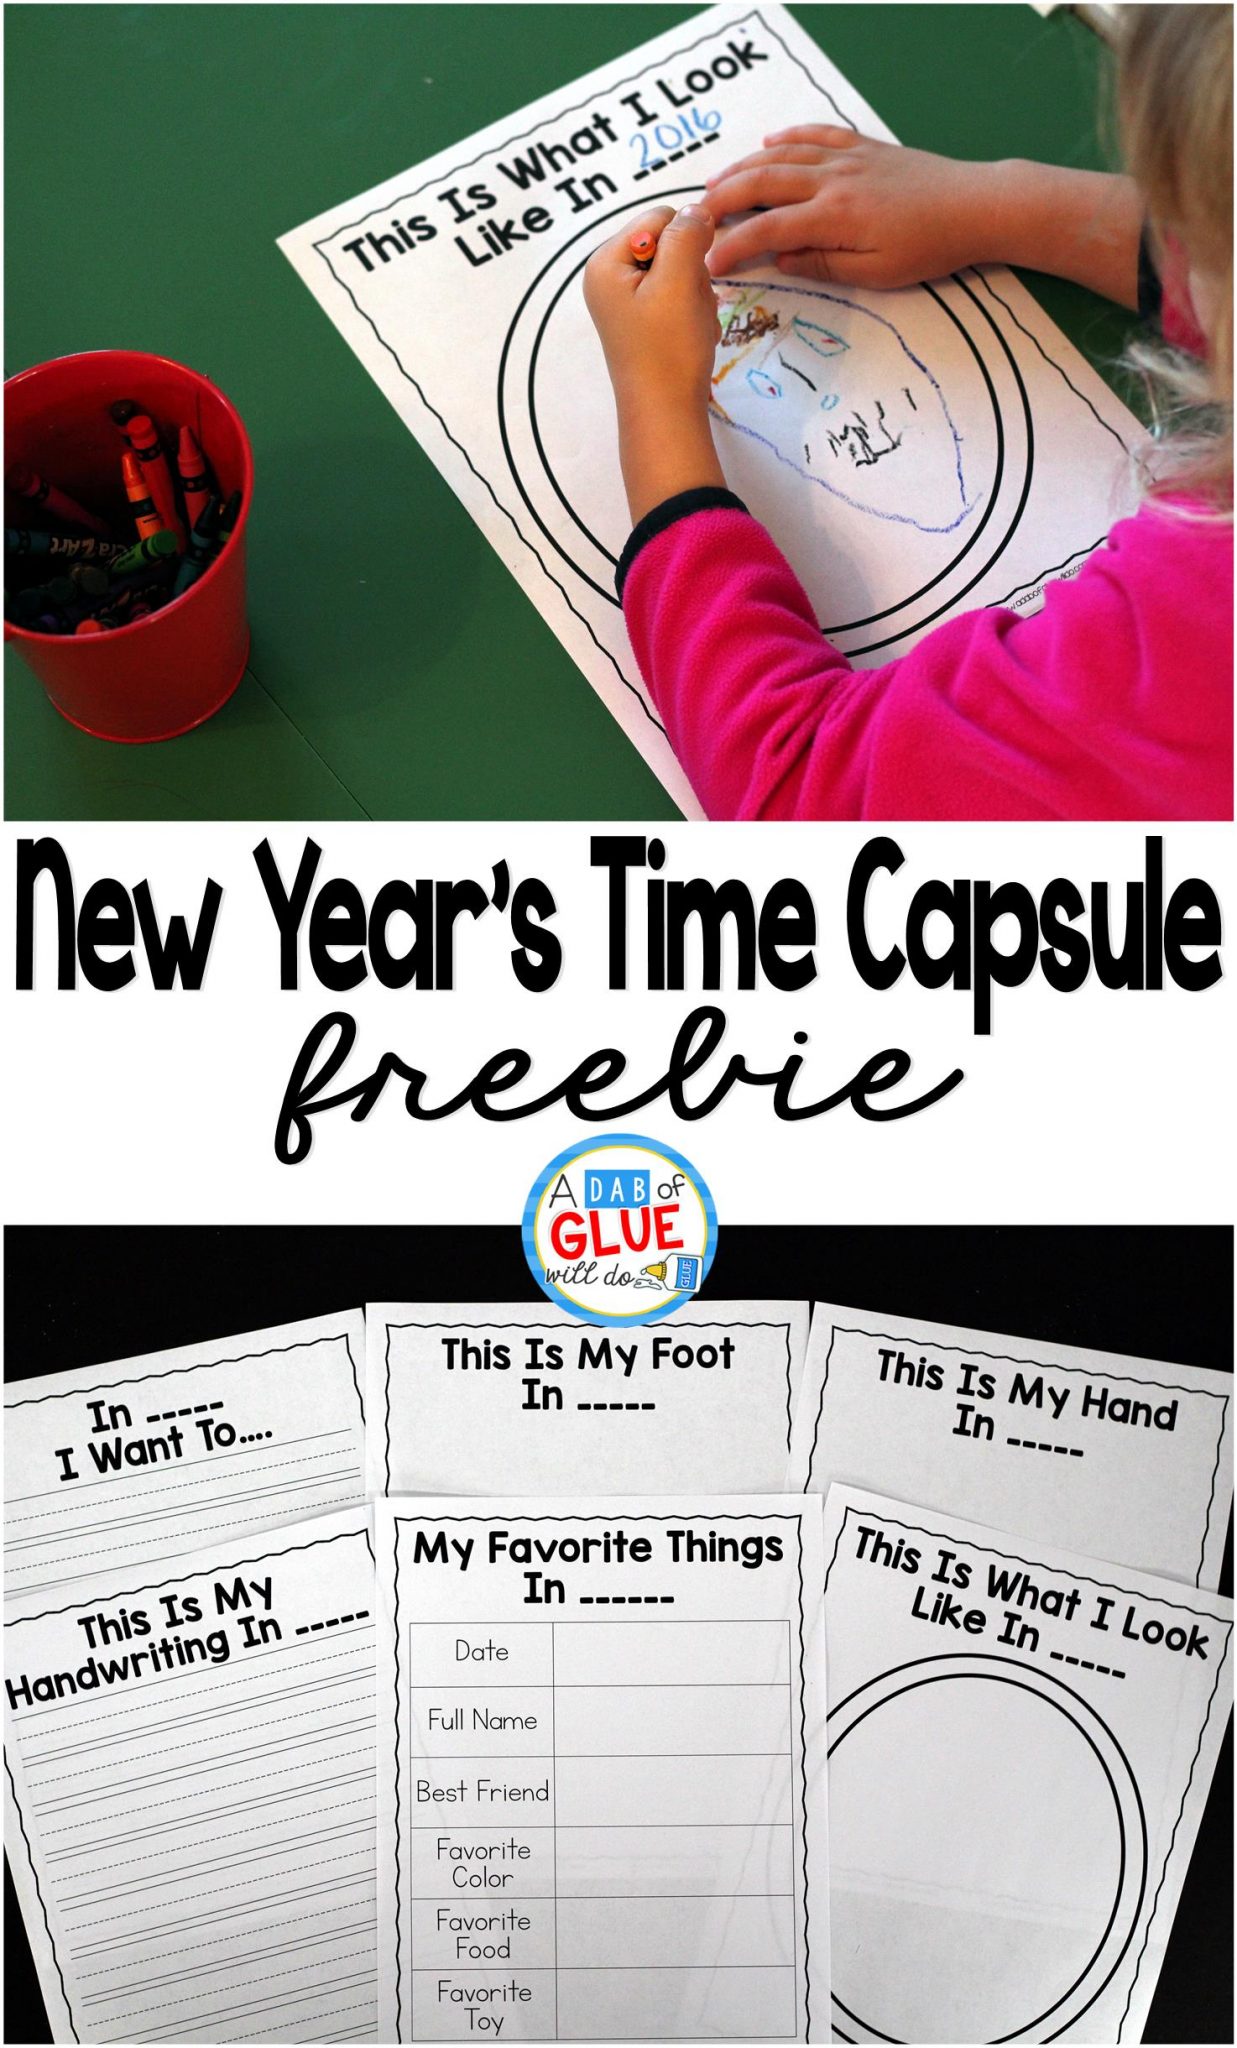 New Year’s Time Capsule Ideas and Printable